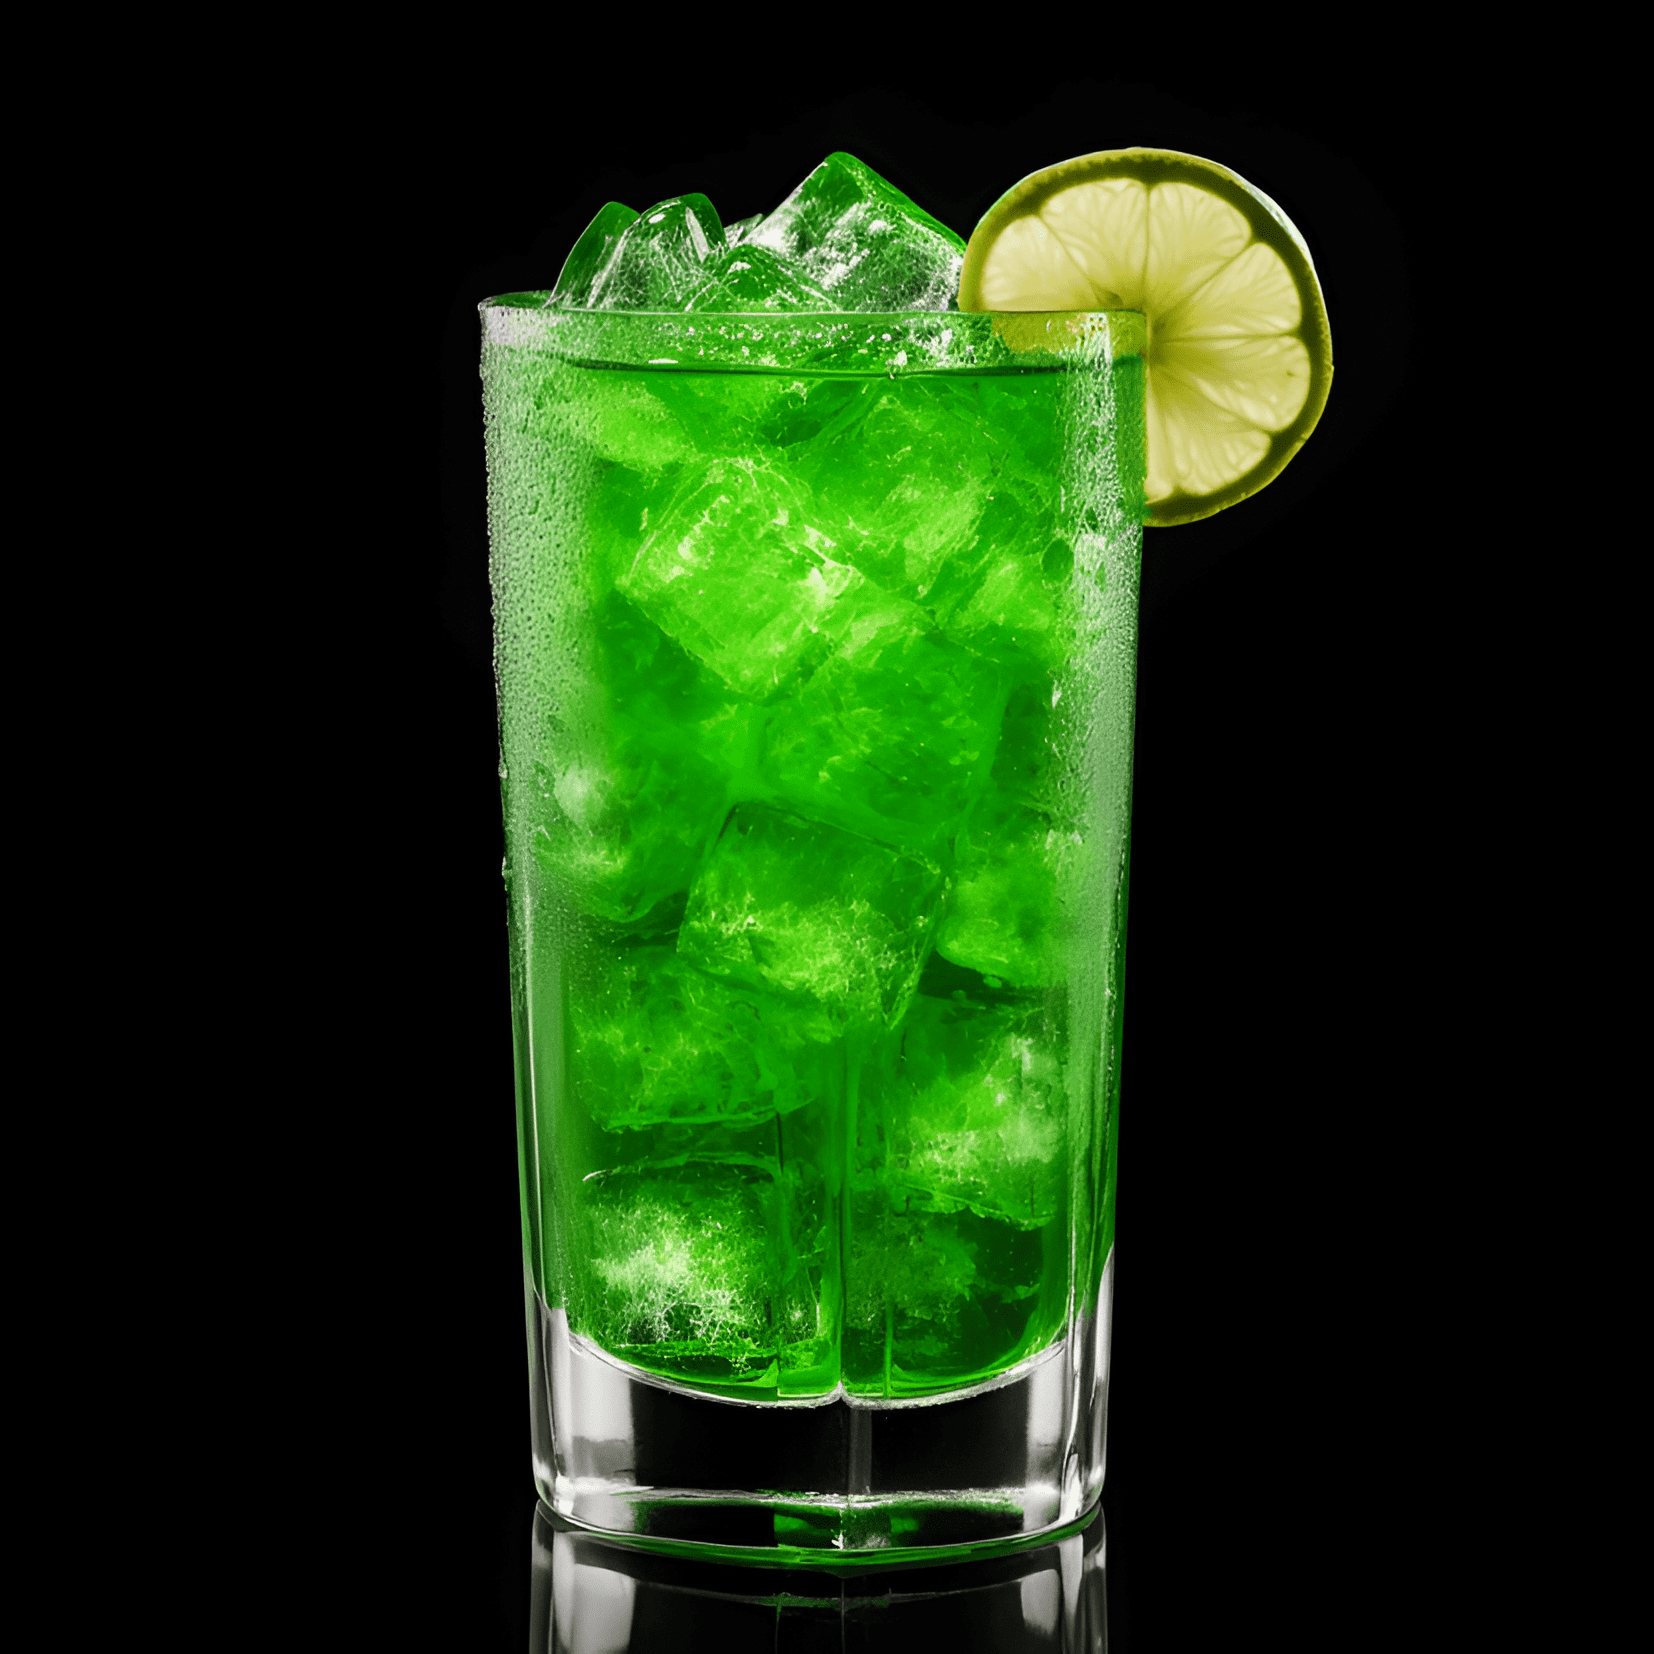 The Green Demon is a sweet and sour cocktail with a strong, fruity flavor. The combination of melon liqueur, lemon-lime soda, and citrus vodka creates a refreshing and tangy taste, while the addition of white rum adds a hint of warmth and depth.